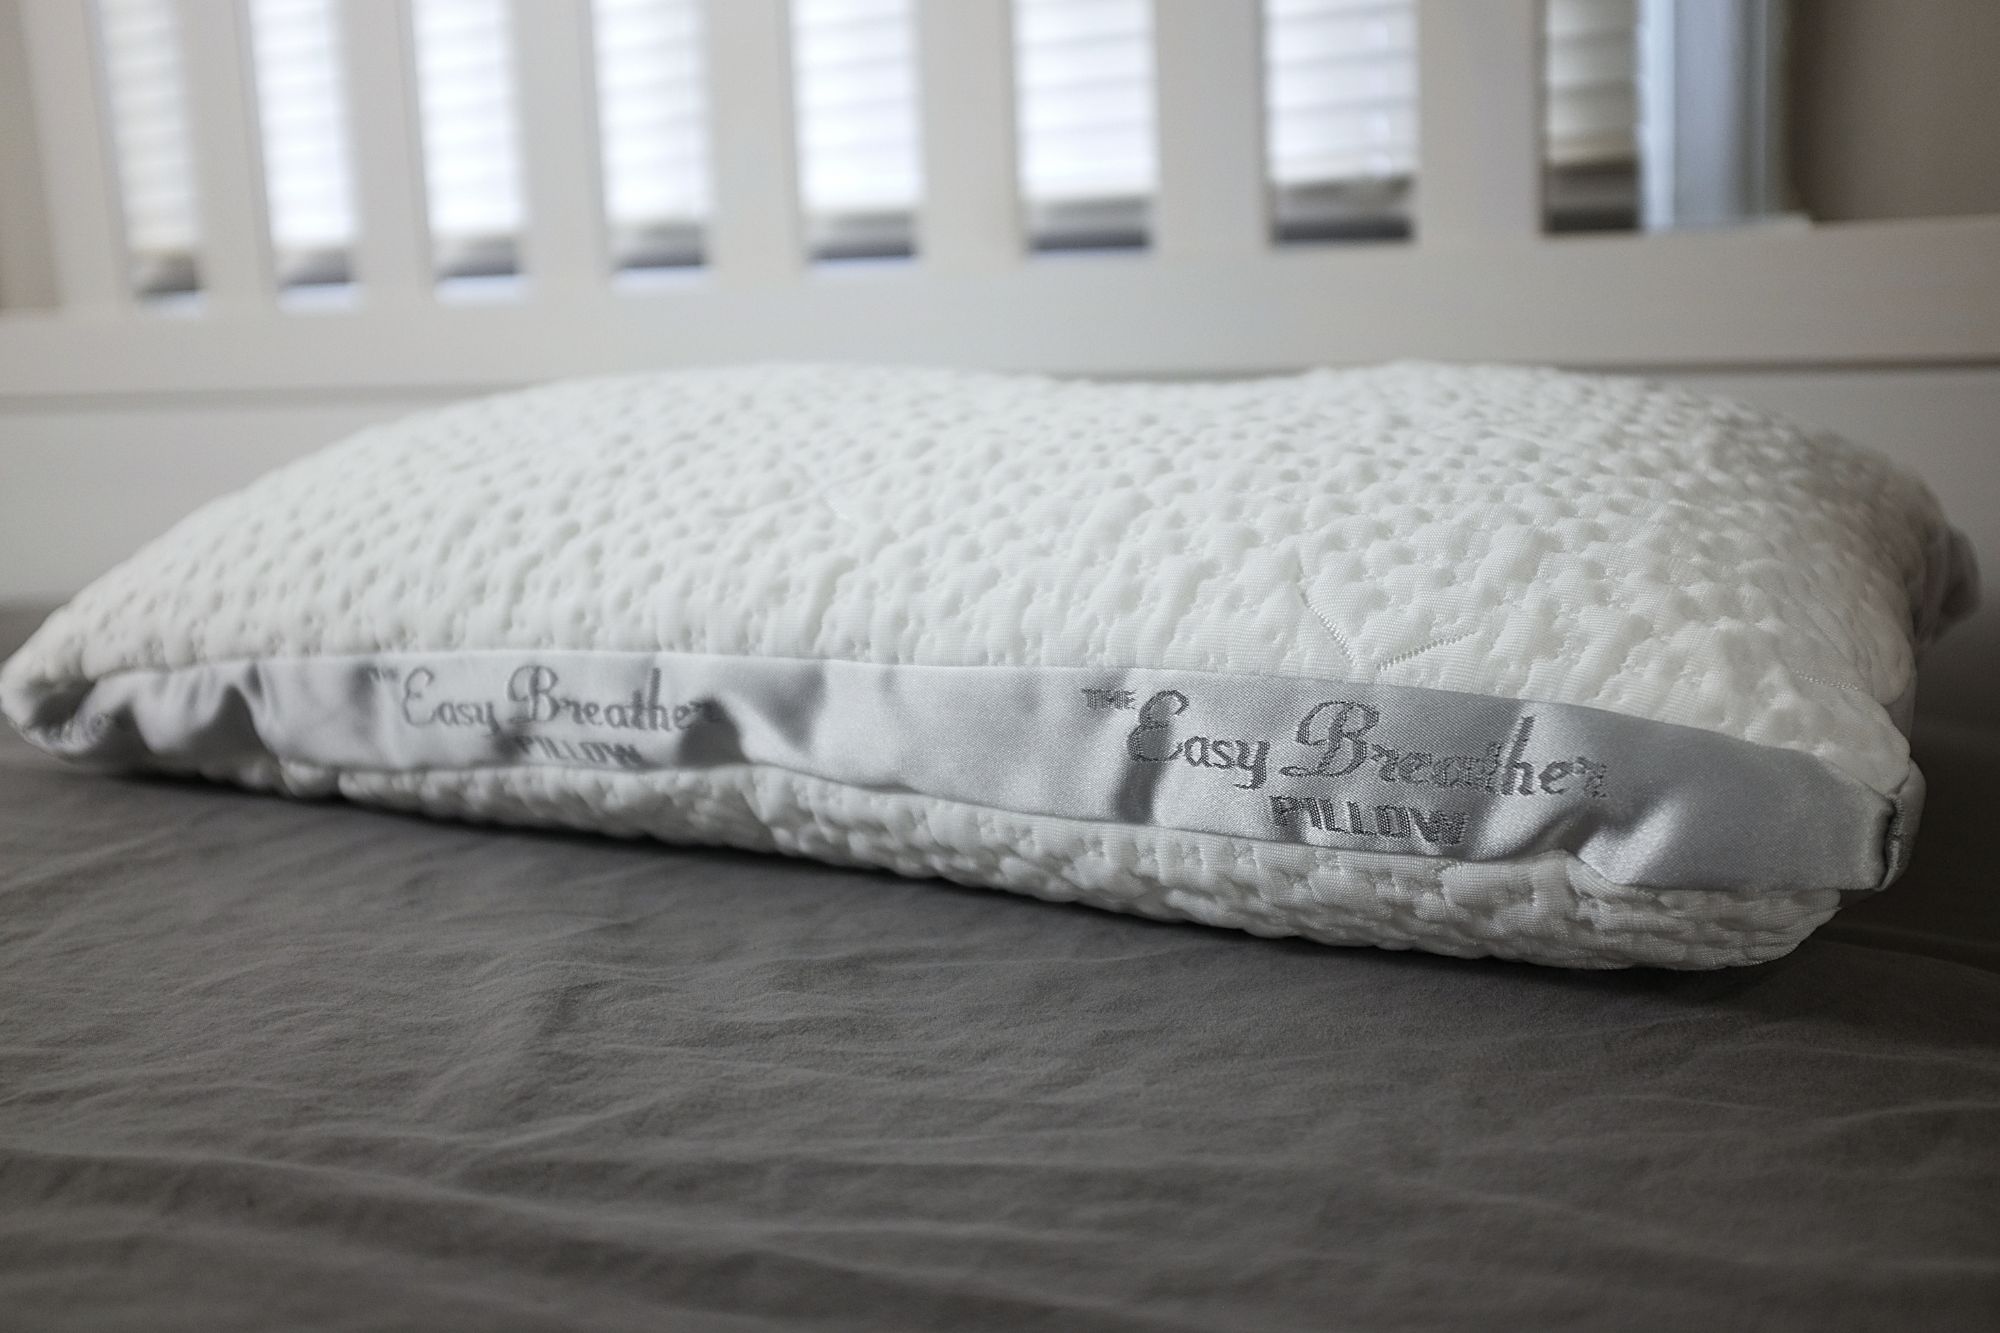 An Honest Zipit Bedding® Review with a Giveaway